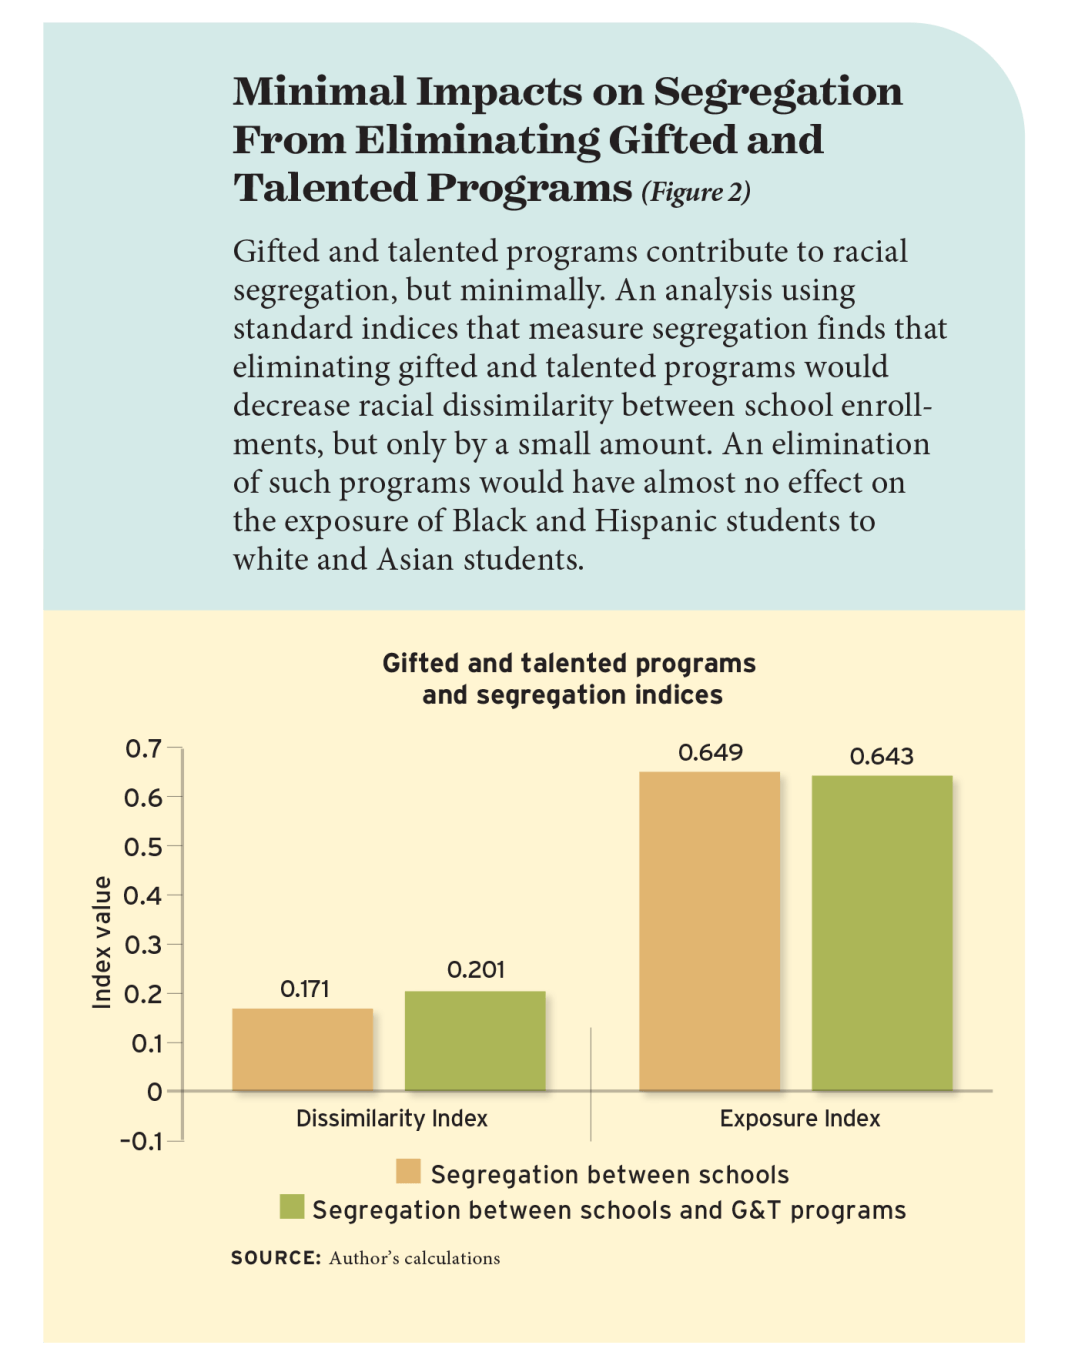 Minimal Impacts on Segregation From Eliminating Gifted and Talented Programs (Figure 2)